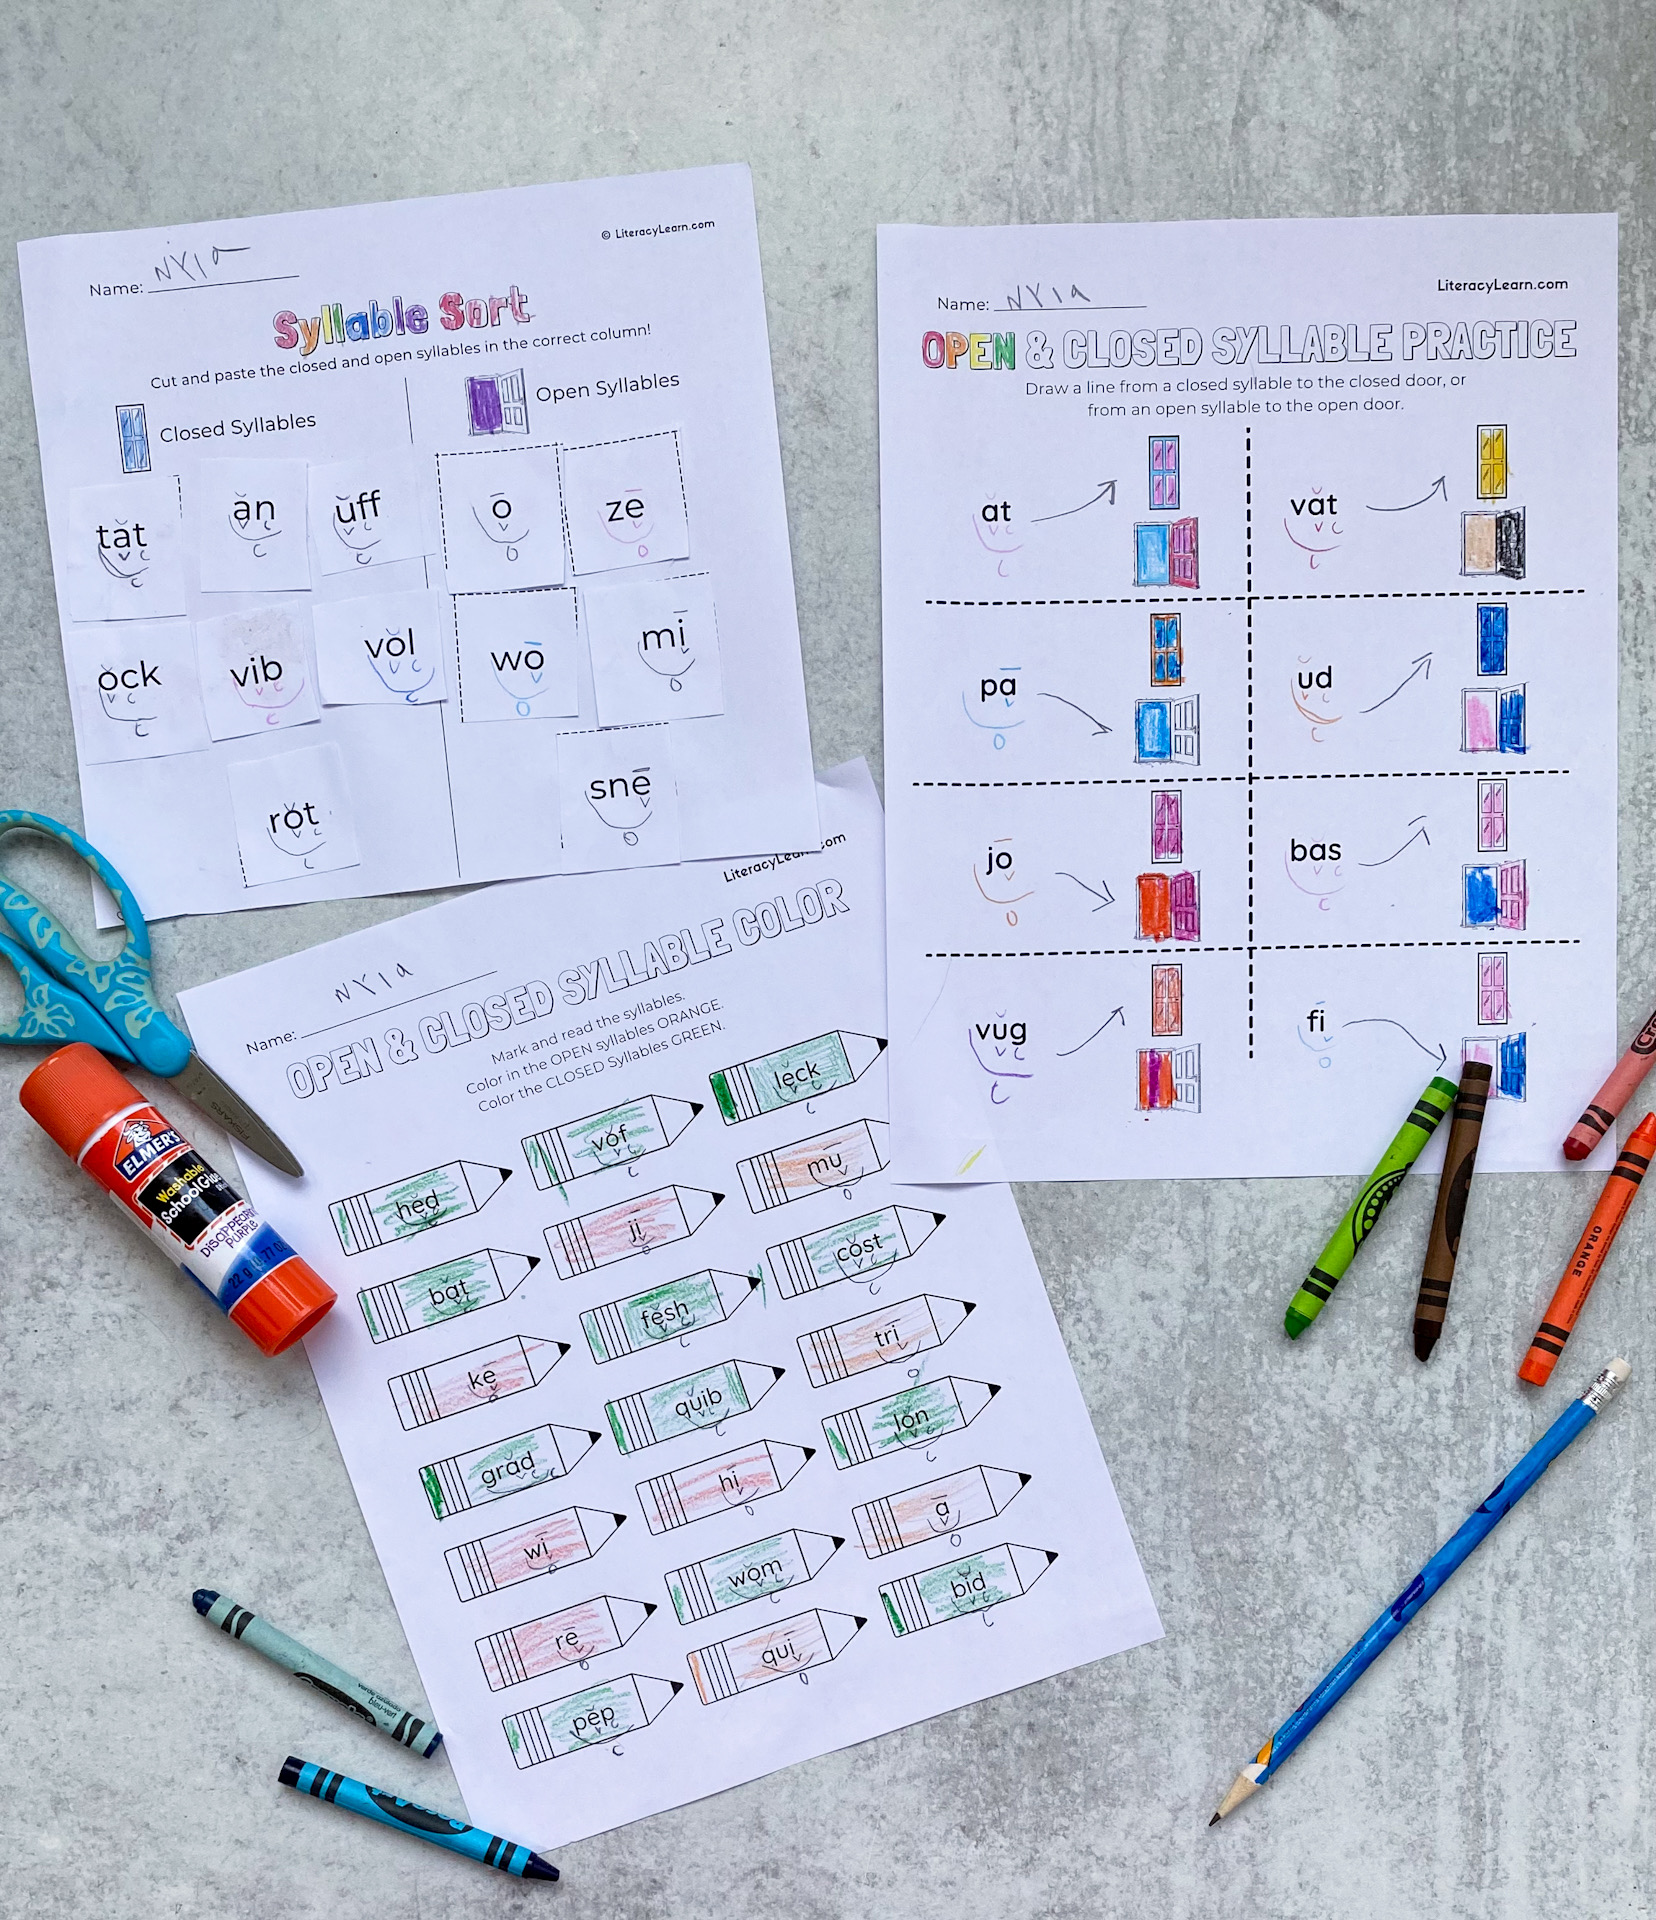 Three completed open and closed syllable worksheets with crayons, scissors, and a glue stick.